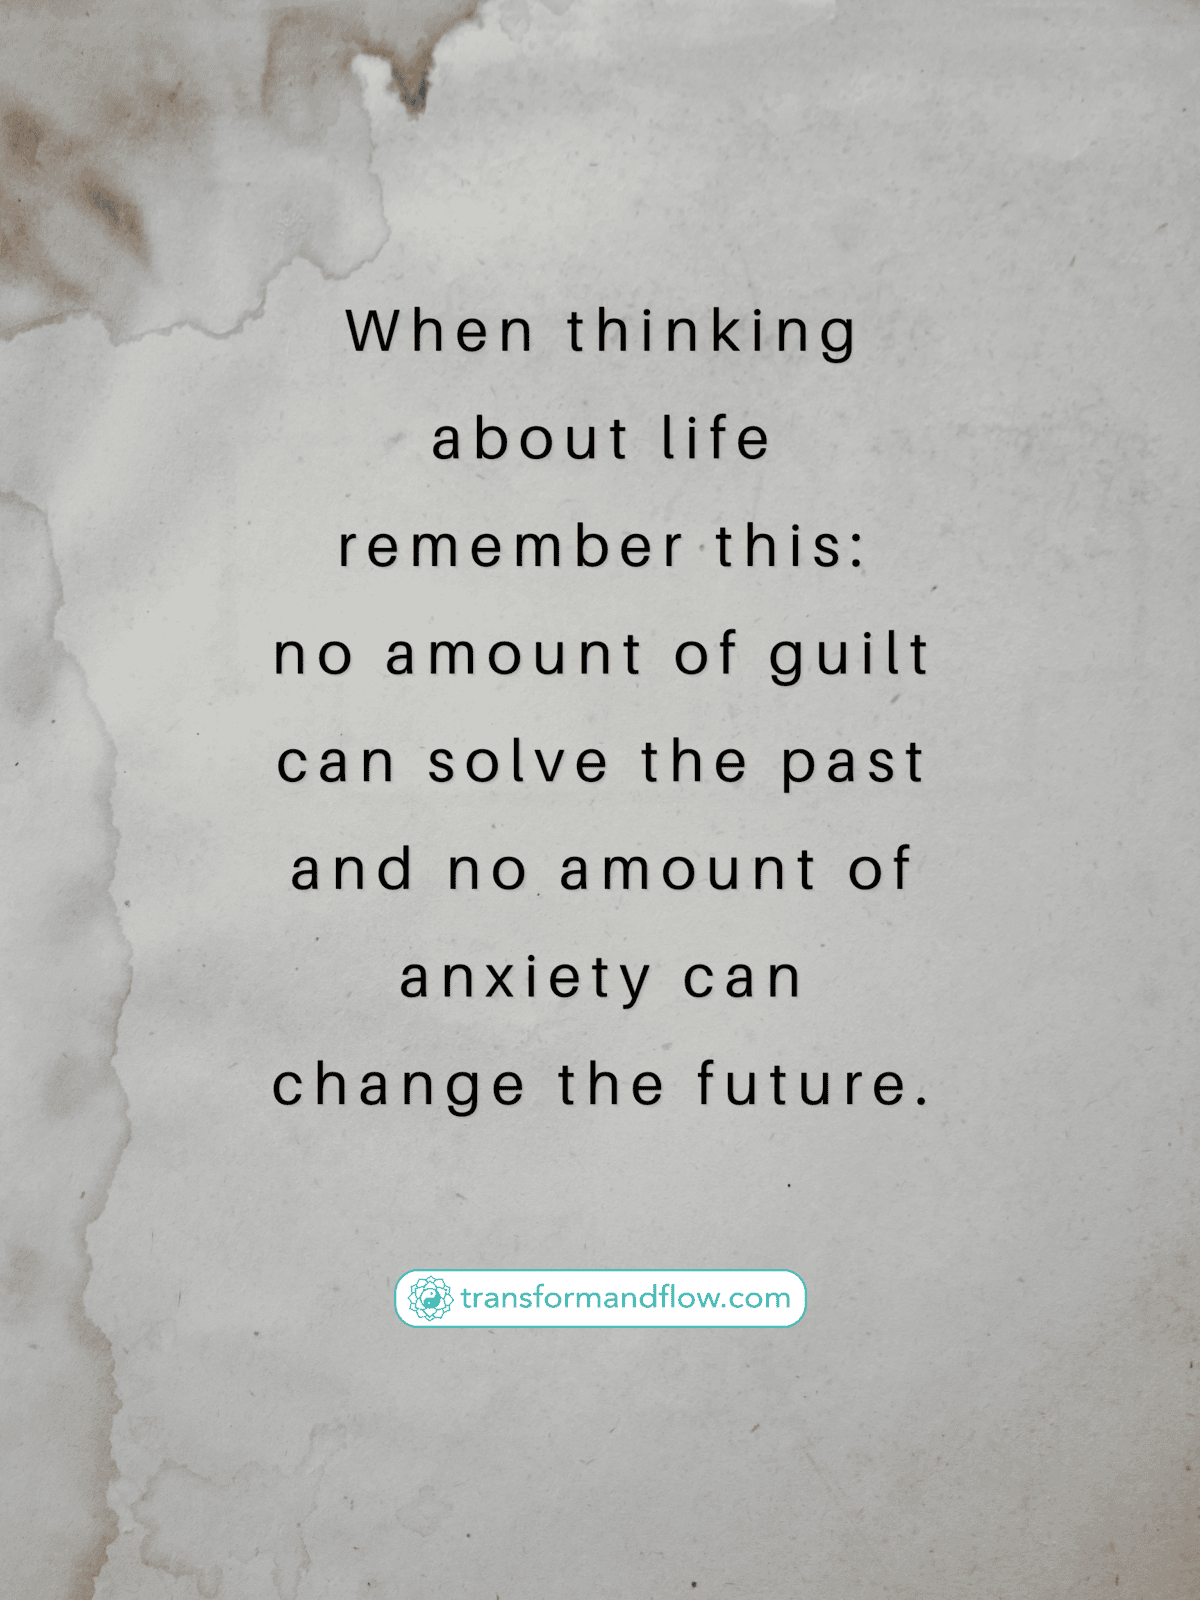 When thinking about life remember this: no amount of guilt can solve the past and no amount of anxiety can change the future.